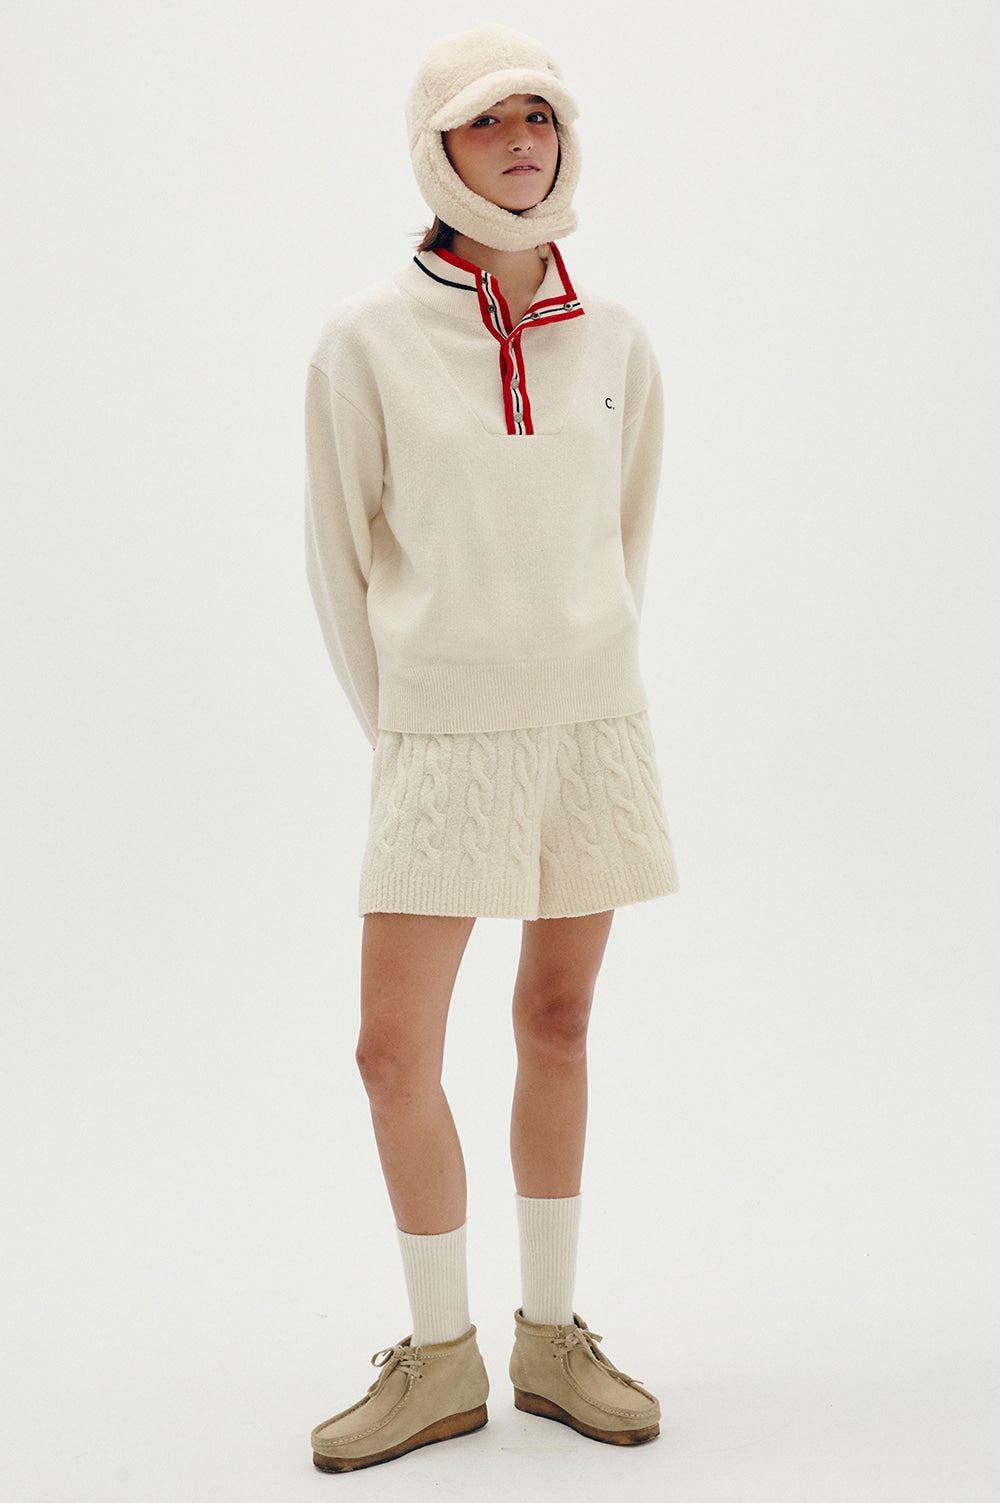 Snap Button Sweater - Ivory